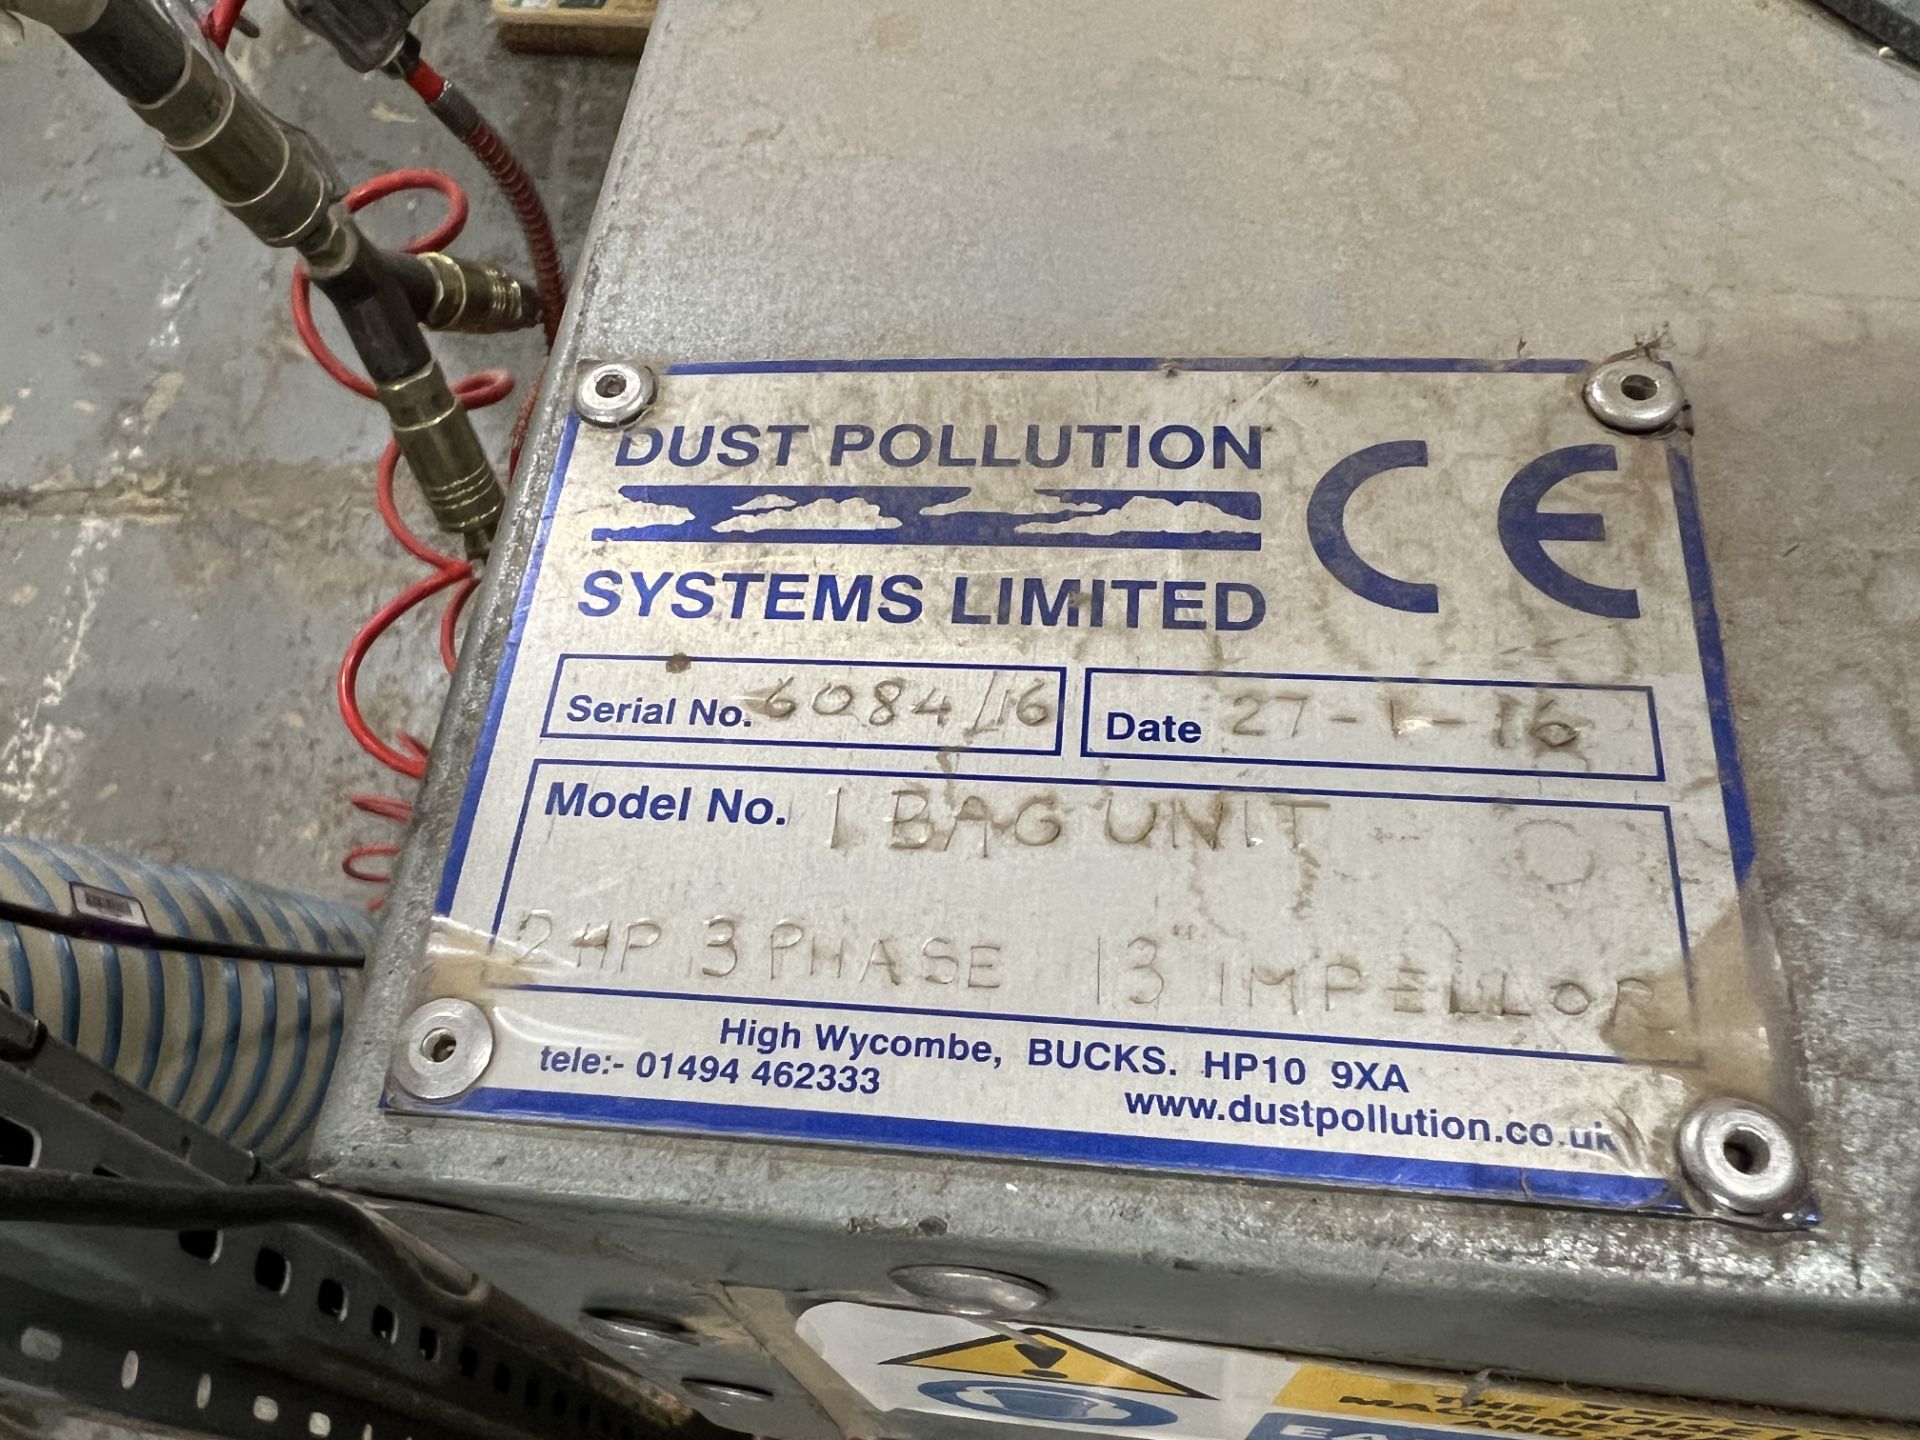 Dust Pollution Systems Lbag Single bag dust collection unit, 400 volts 3 Ph., S/No.6084/16, DOM - Image 3 of 4